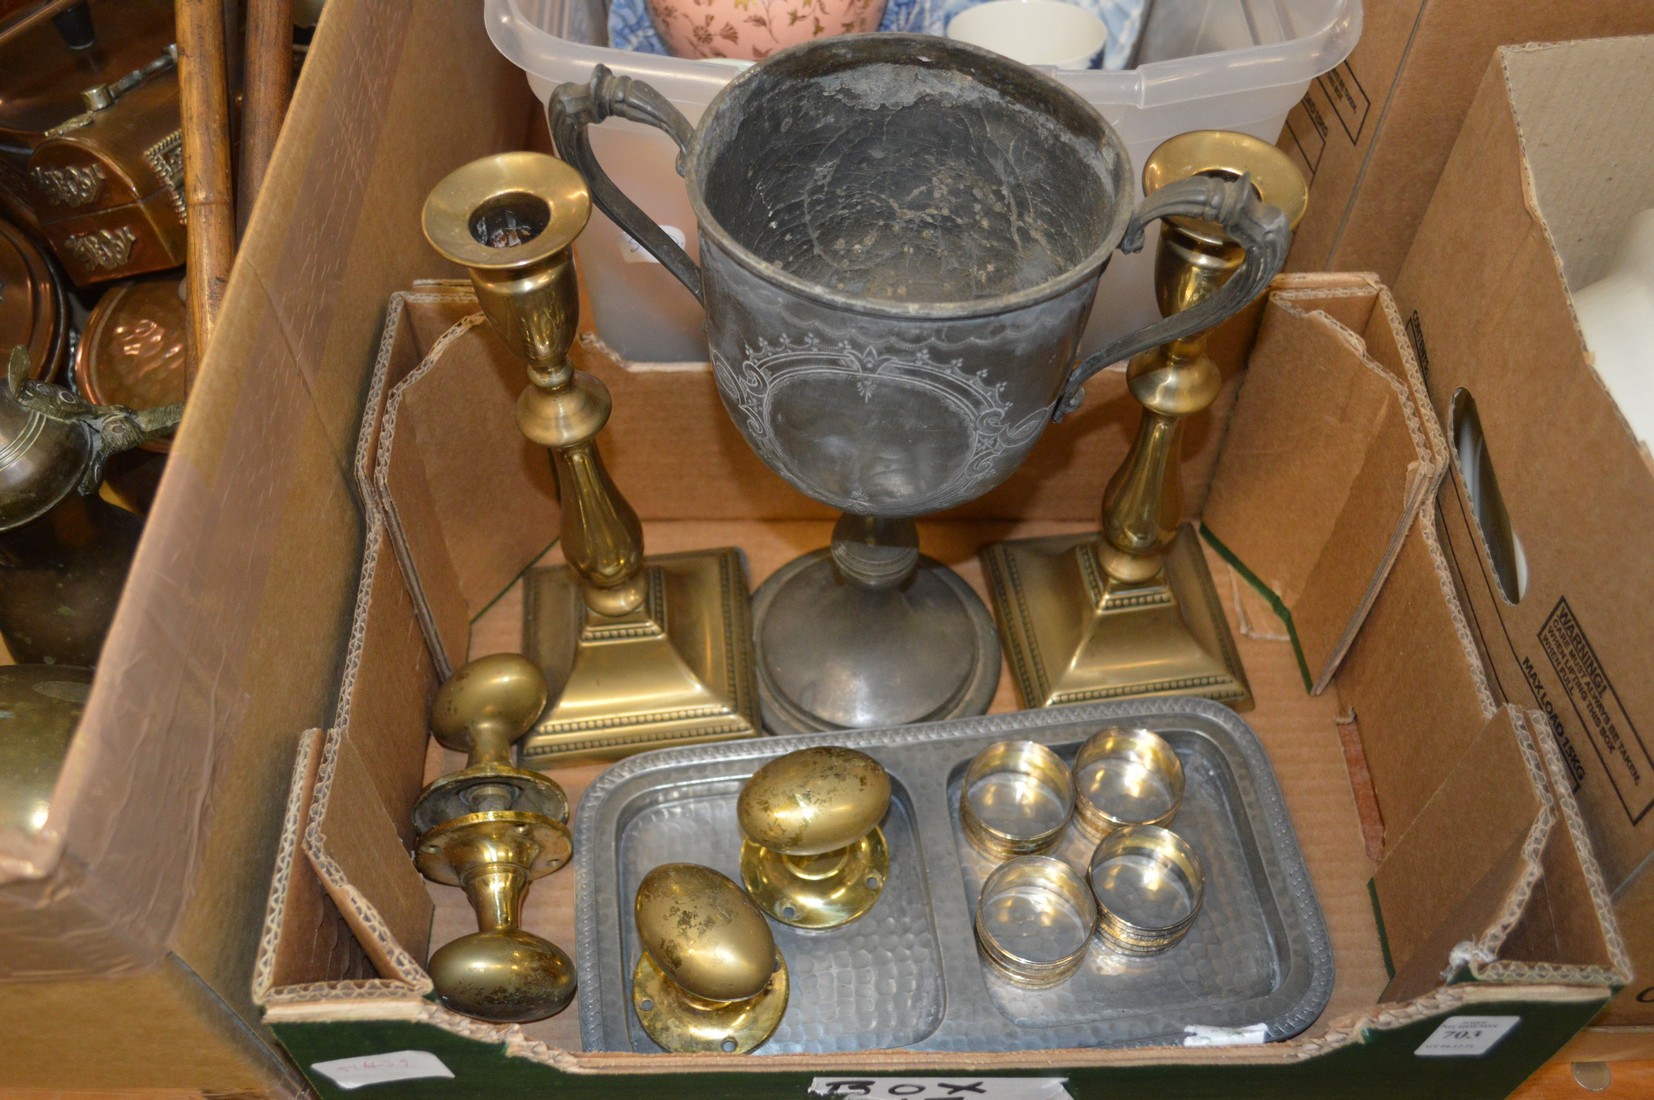 A pair of brass candlesticks, a pewter cup etc.